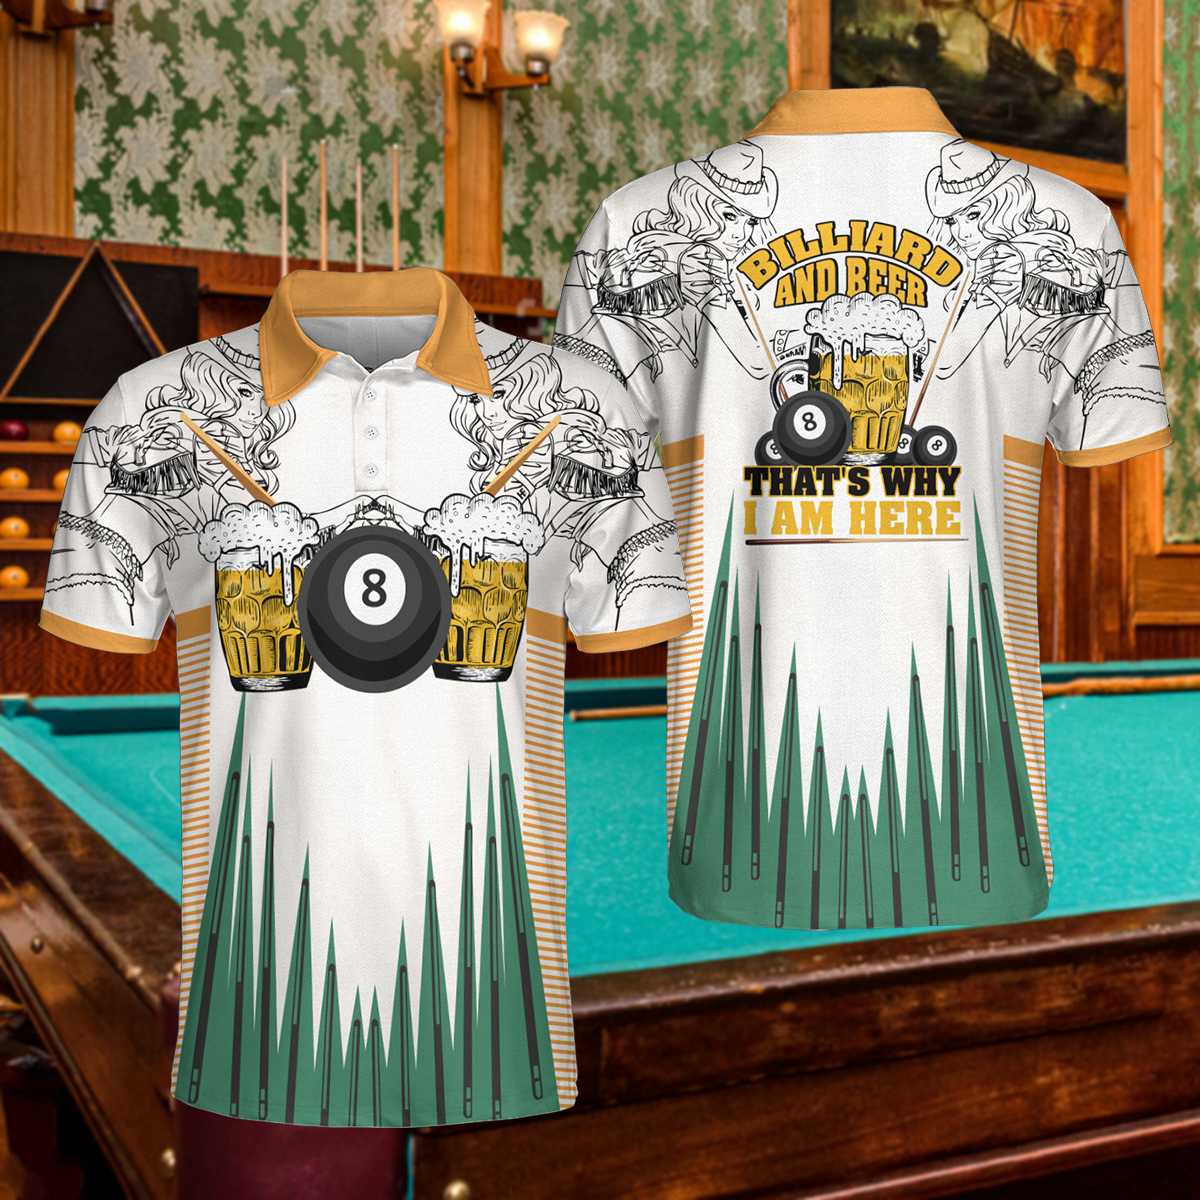 8-balls Billiards And Beer Cowgirl Polo Shirt/ That''s Why I Am Here Polo Shirt/ Best Billiards Shirt For Men